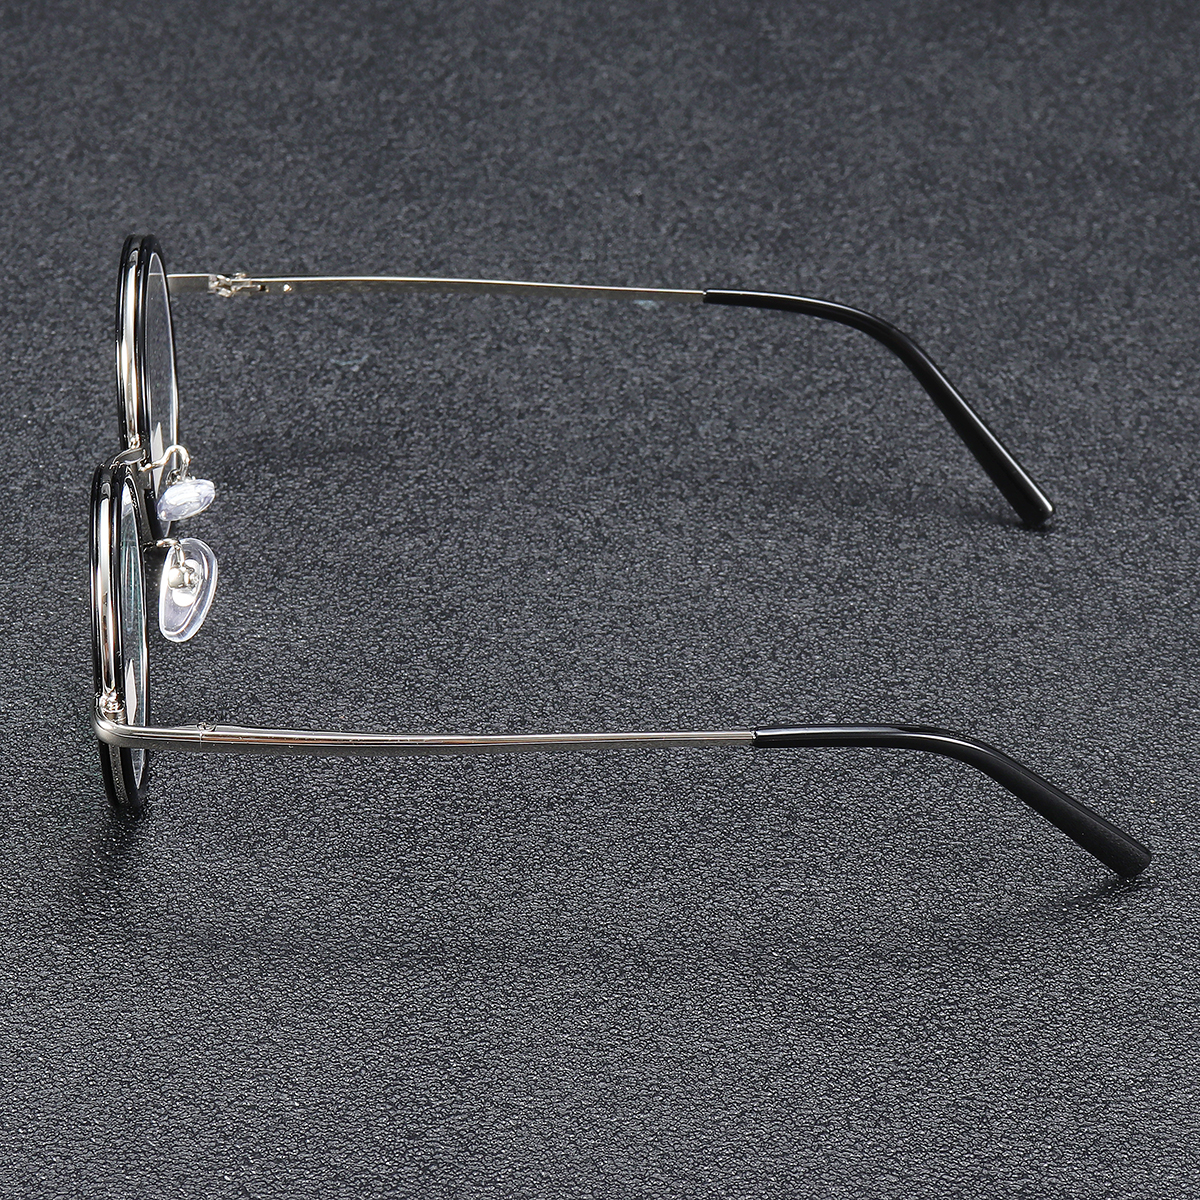 Minleaf-Retro-Round-Light-Weight-Magnifying-Best-Reading-Glasses-Fatigue-Relieve-Strength-1044859